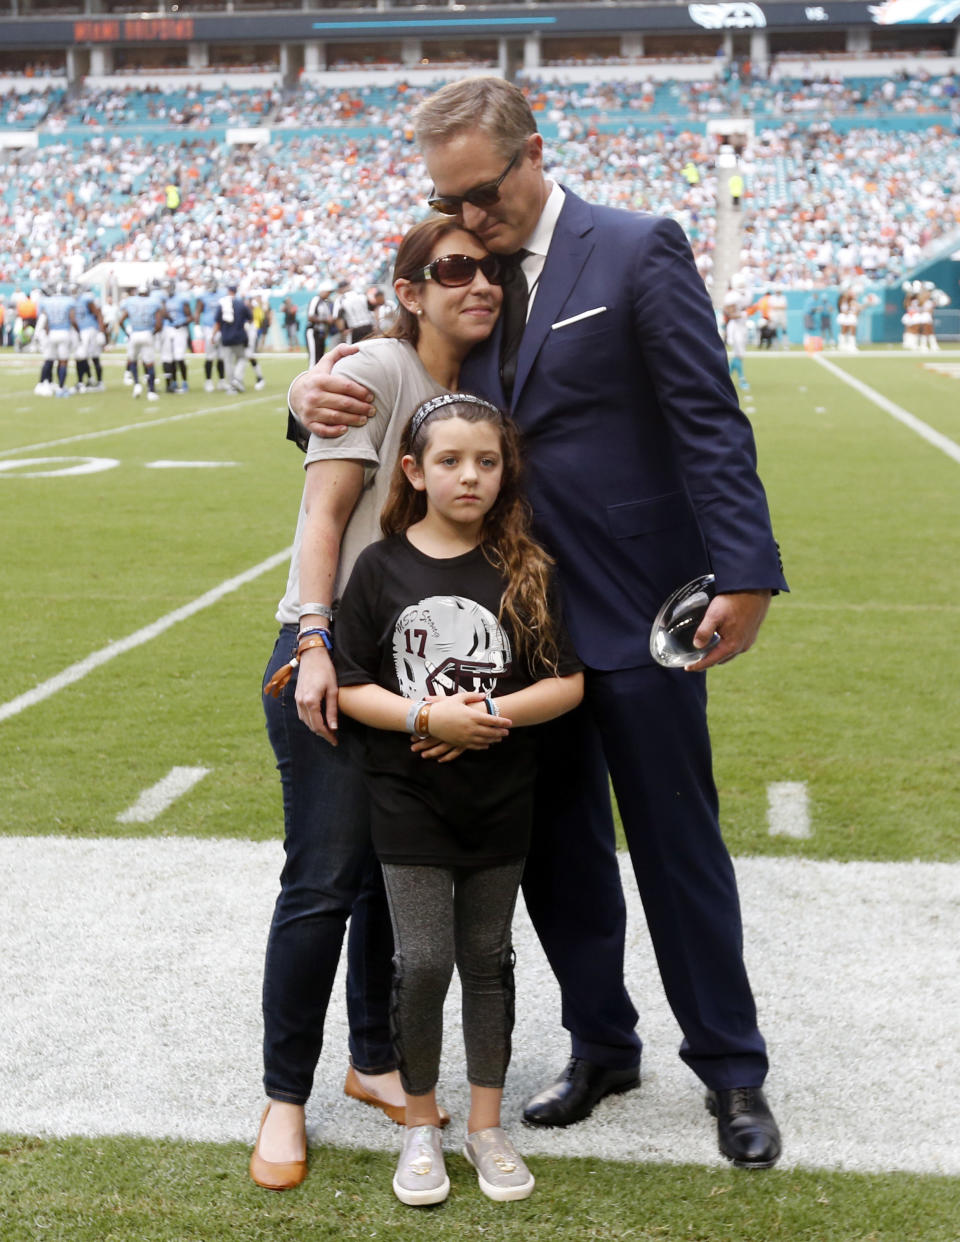 FILE - Tom Garfinkel, Miami Dolphins President and CEO, hugs Melissa Feis during a presentation honoring her husband, Marjorie Stoneman Douglas High School Football Coach Aaron Feis, during the second half of an NFL football game against the Tennessee Titans, Sunday, Sept. 9, 2018, in Miami Gardens, Fla. At the center is Feis' daughter Arielle. Aaron Feis was honored as the Miami Dolphins 2018 George F. Smith Coach of the Year. (AP Photo/Wilfredo Lee, File)